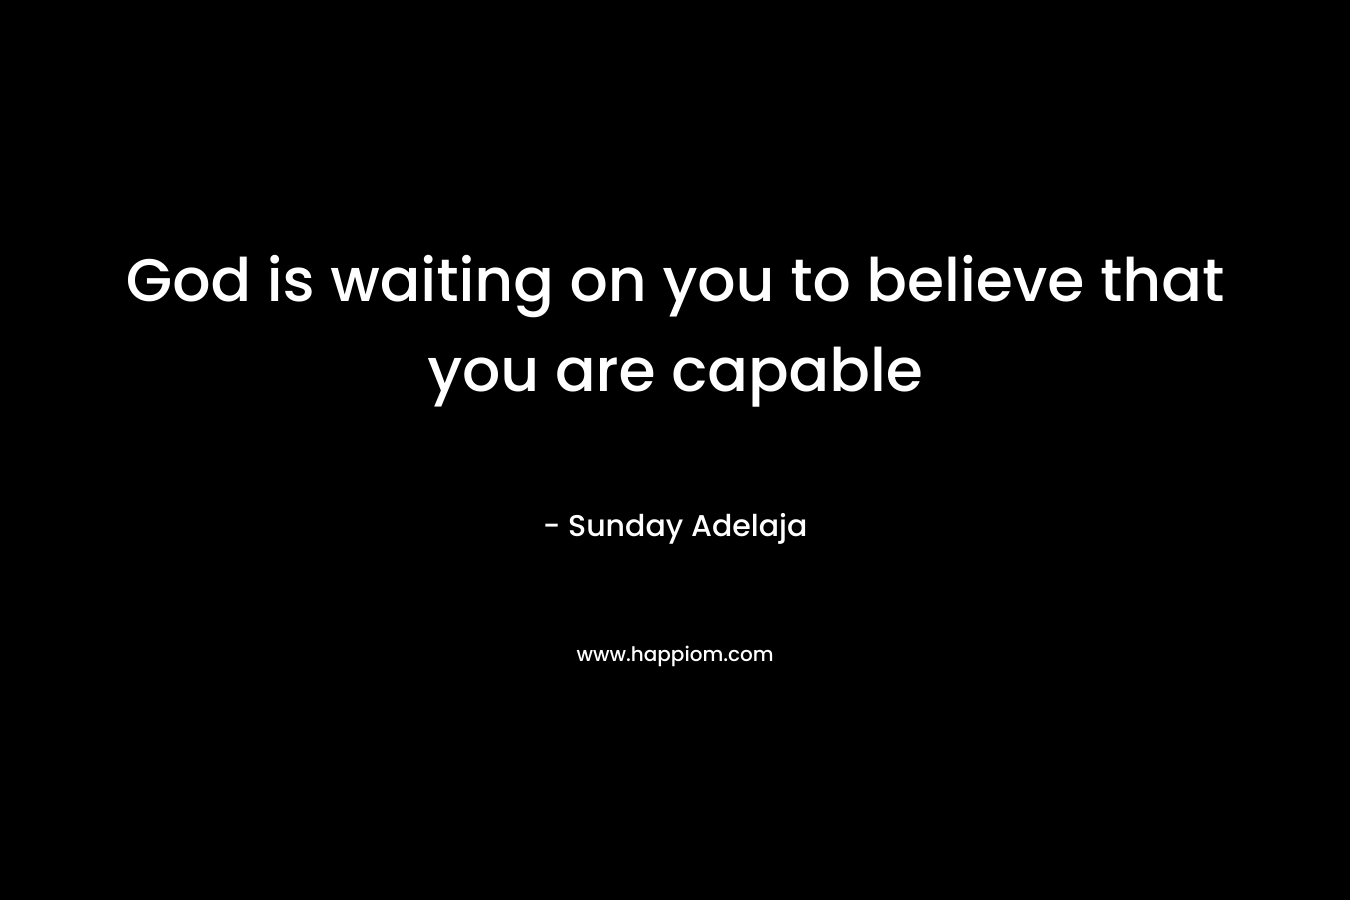 God is waiting on you to believe that you are capable